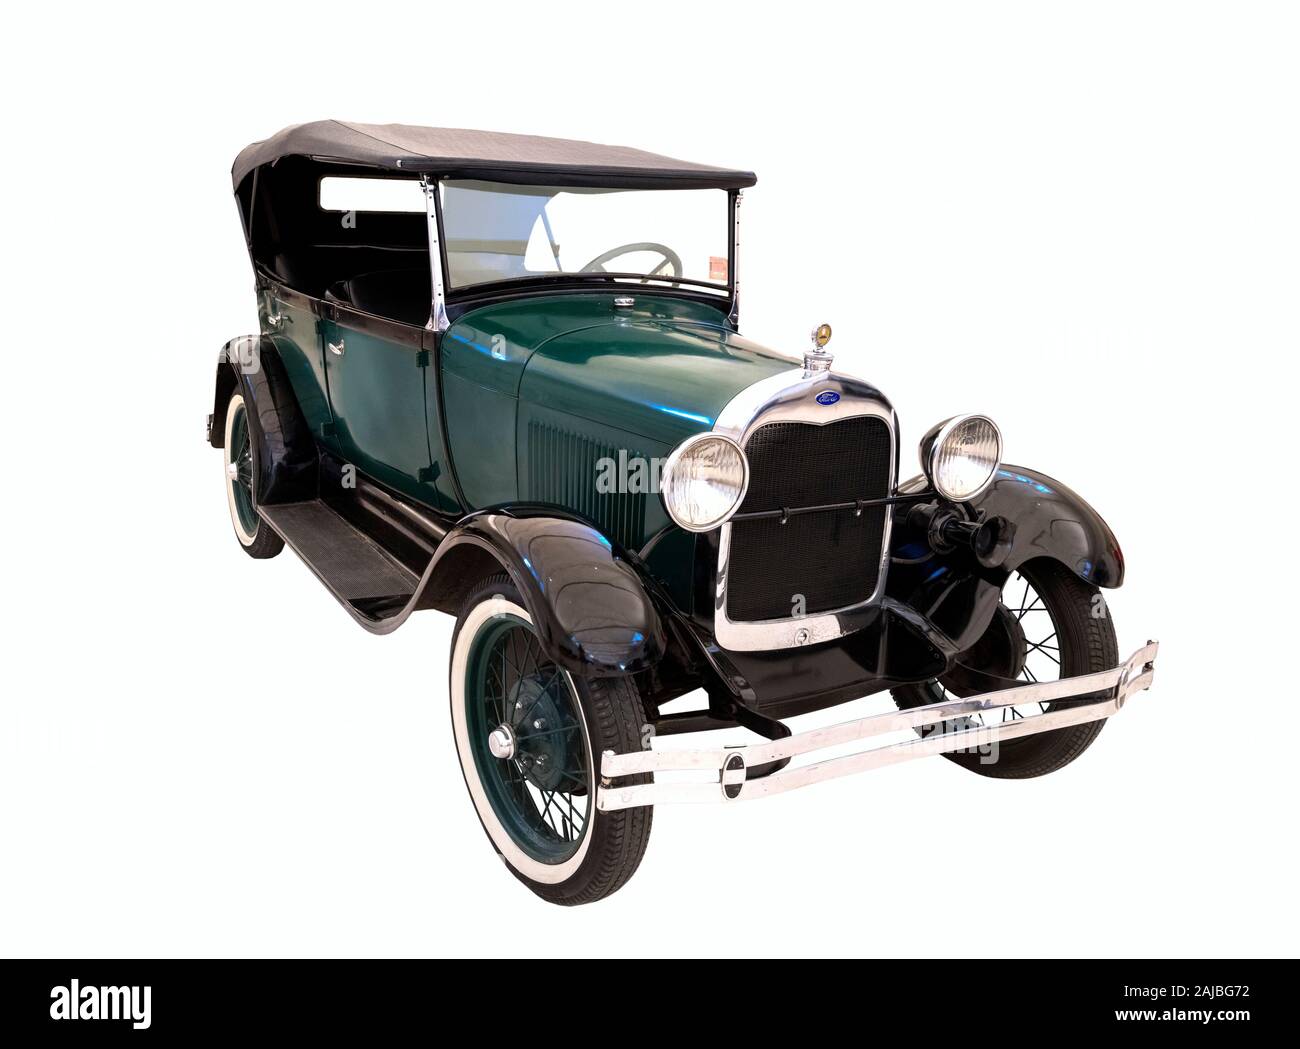 1929 Ford Model A Phaeton On Display In The Frick Art And Historical Center Pittsburgh Pennsylvania Usa Stock Photo Alamy